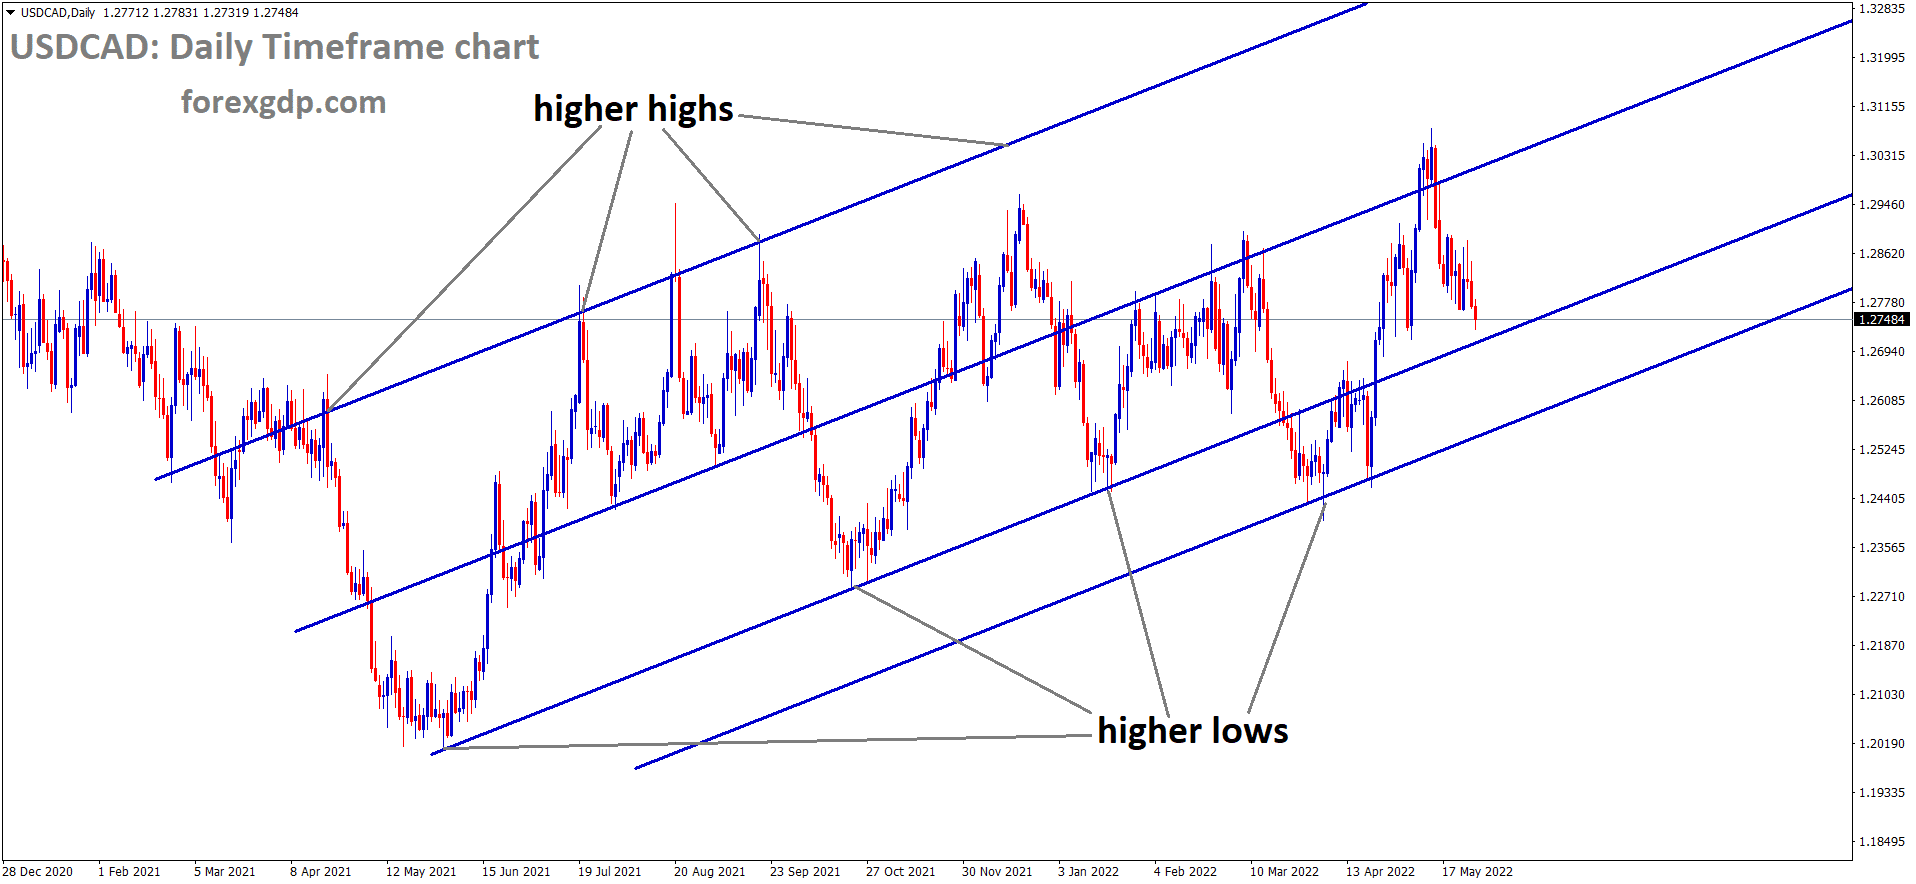 USDCAD Daily Time Frame Analysis Market is moving in an Ascending channel and the Market has reached the higher low area of the channel